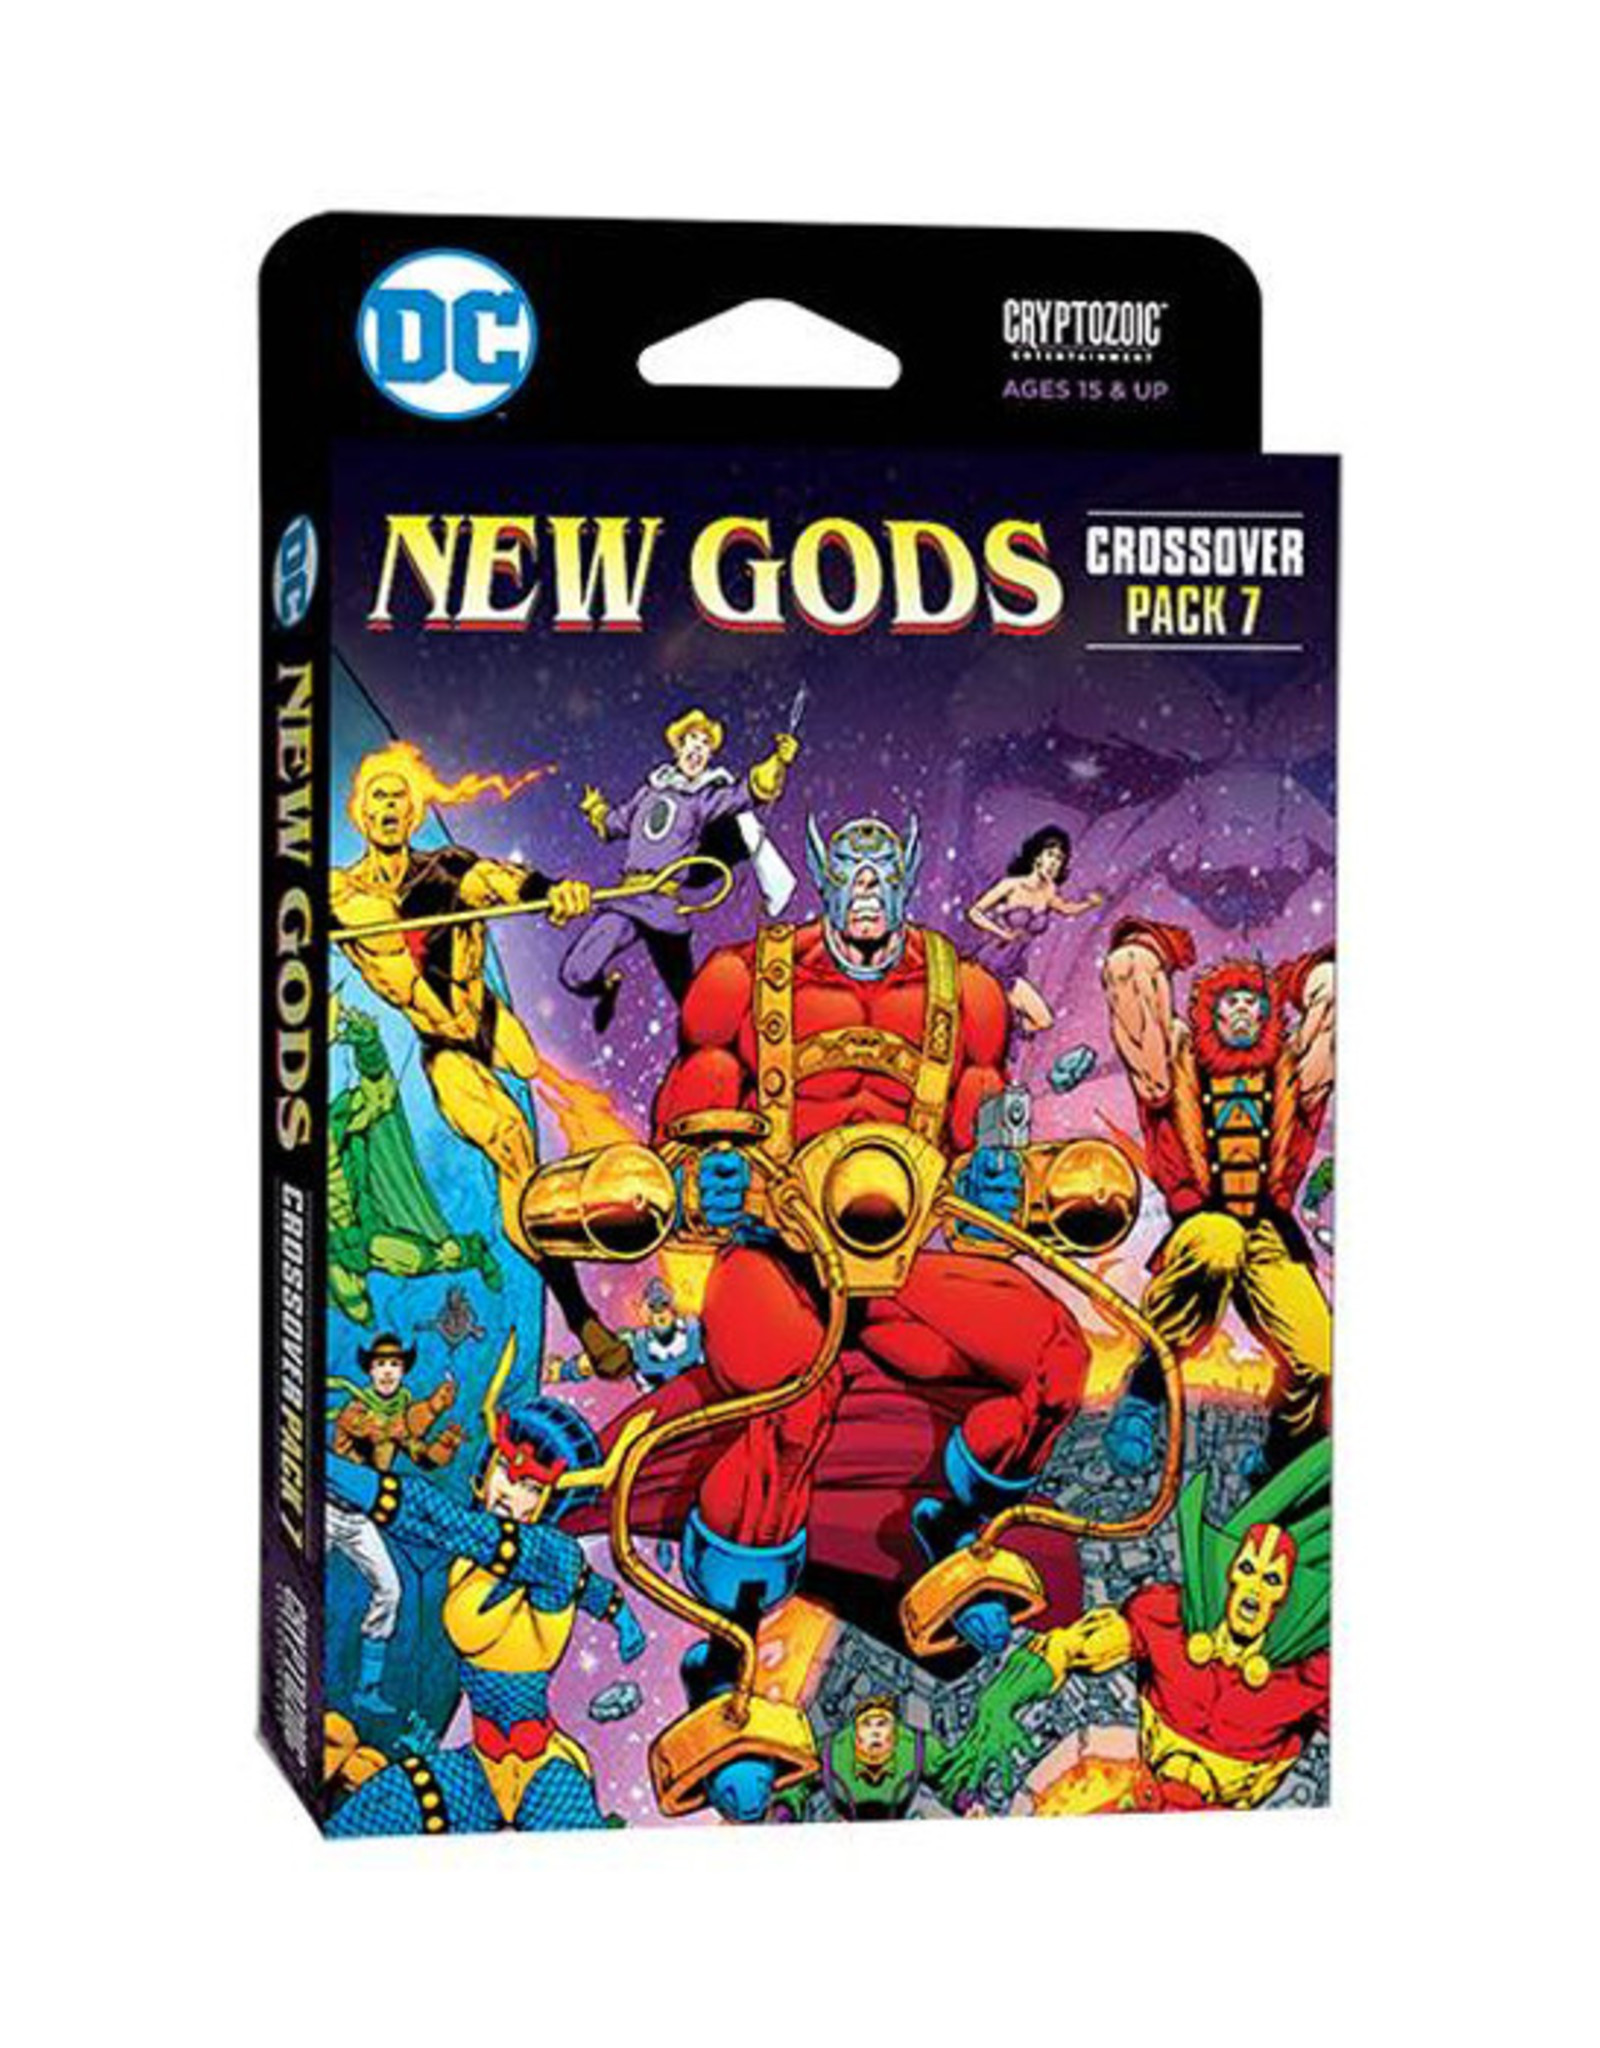 DC Deck Building Game: Crossover Pack 7 - New Gods